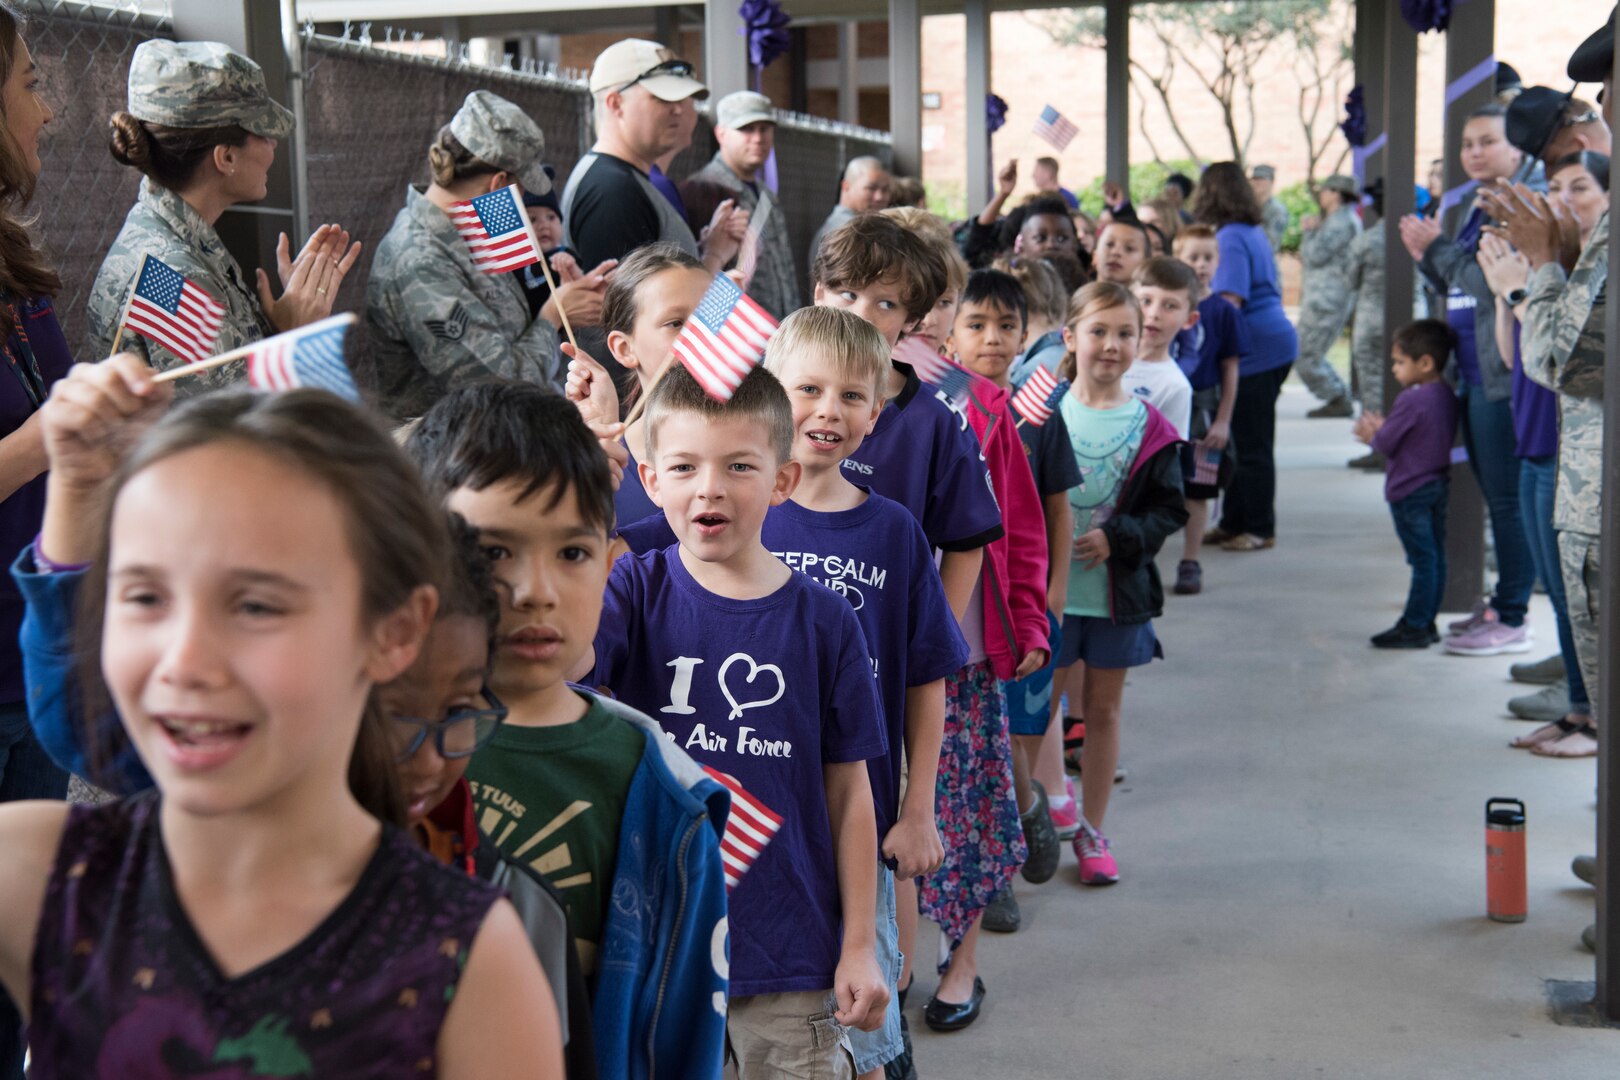 Students at Lackland Independent School District march in the PurpleUp! Parade April 12, 2019, at Joint Base San Antonio-Lackland, Texas.